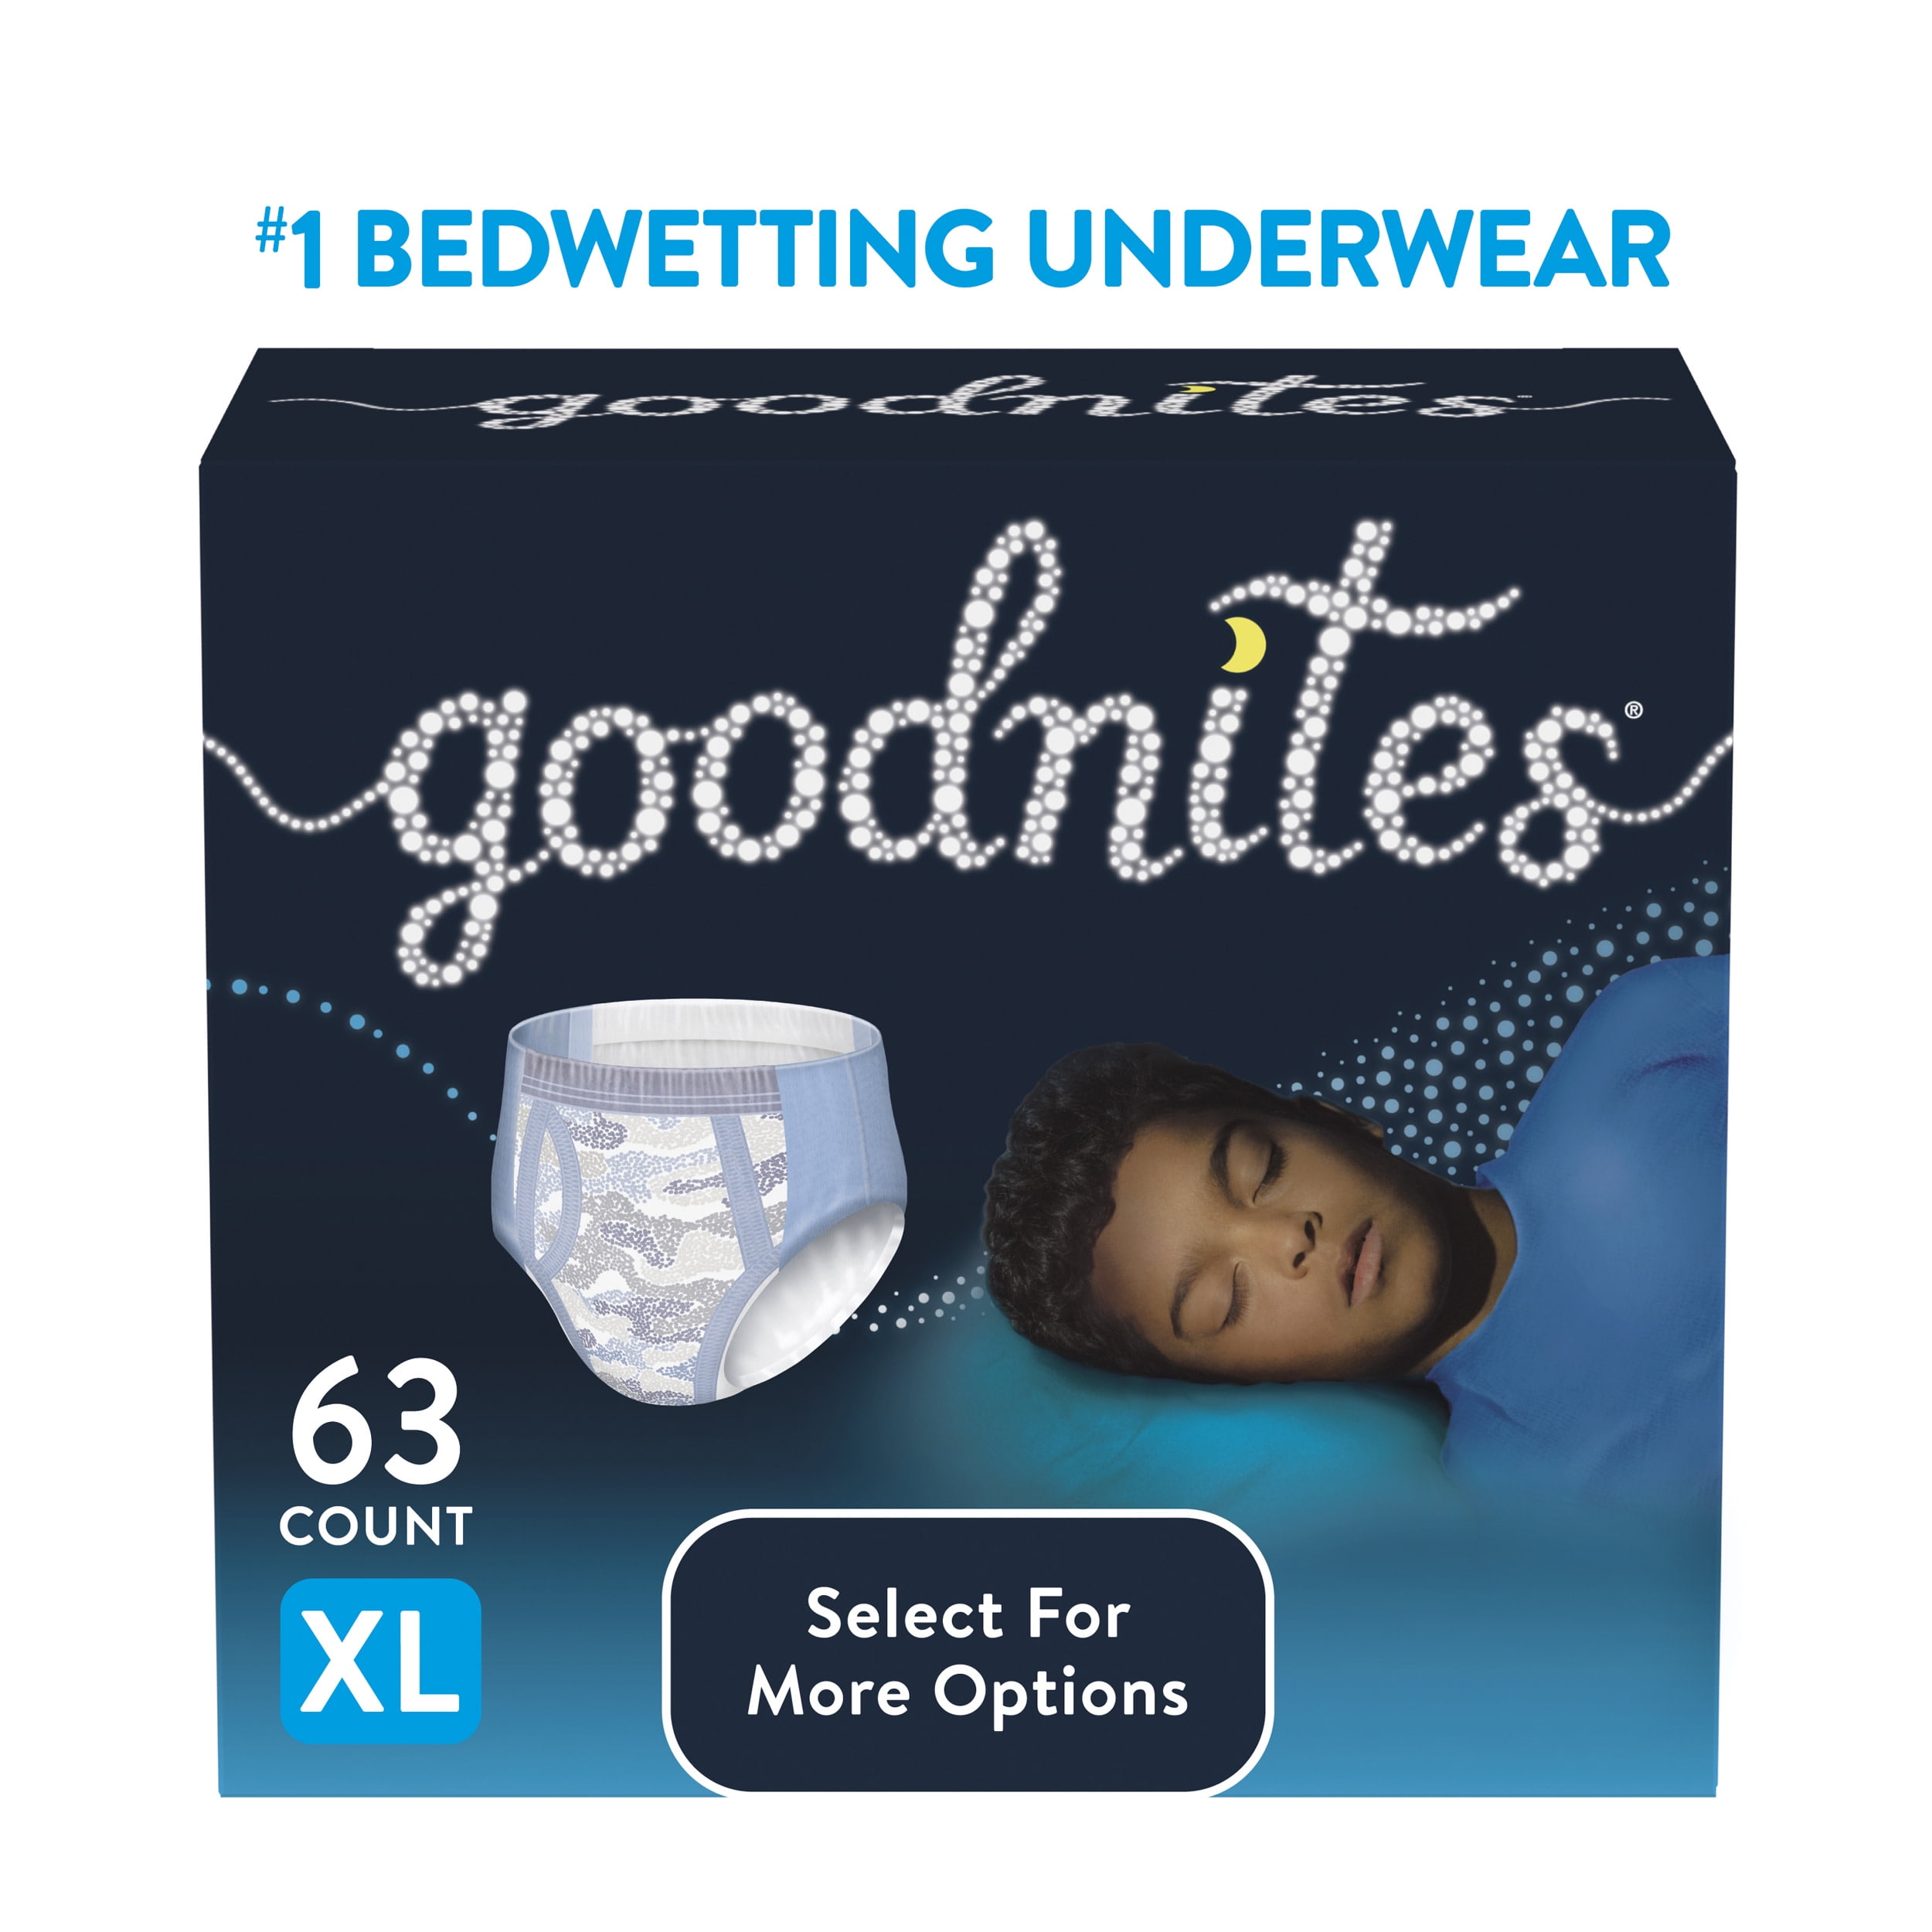 Goodnites Nighttime Bedwetting Underwear for Boys, XL, 63 Ct (Select for  More Options) 